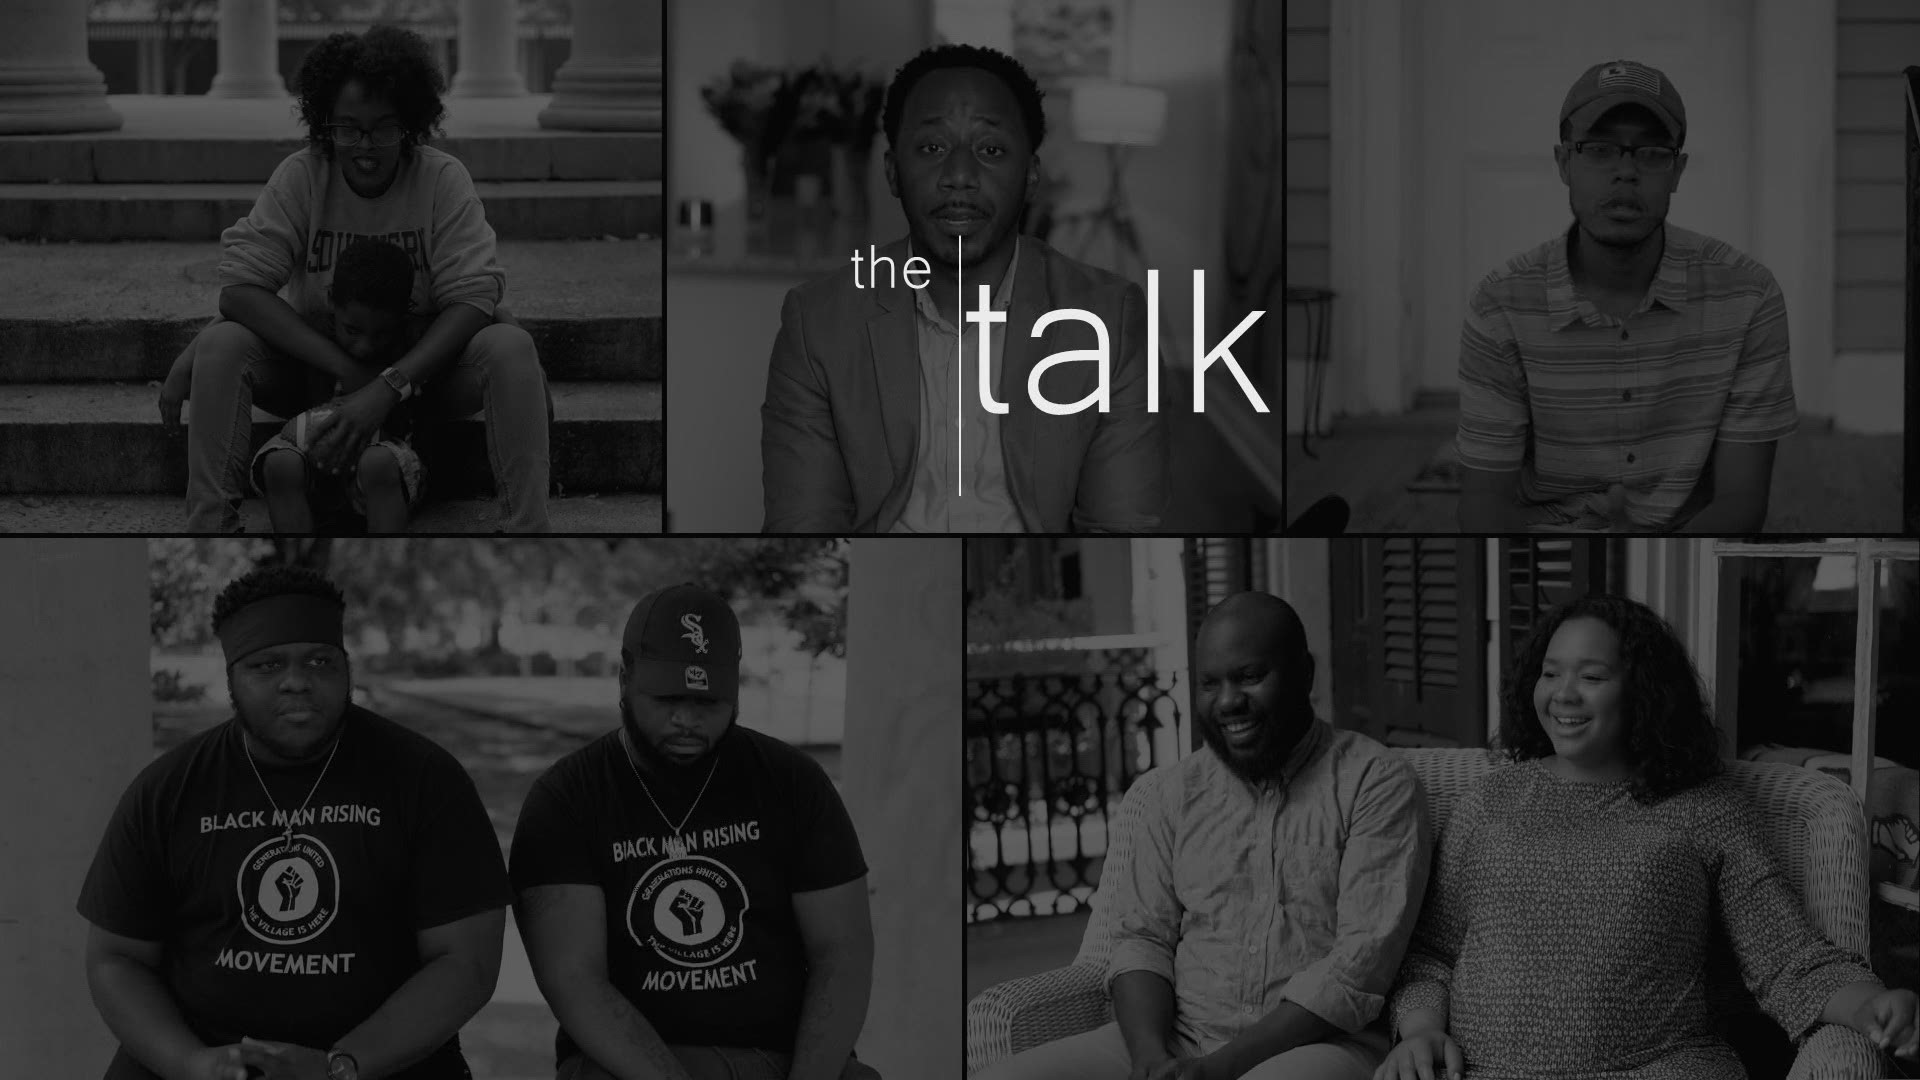 The Talk: Two men grew up in the same city, but live in different worlds